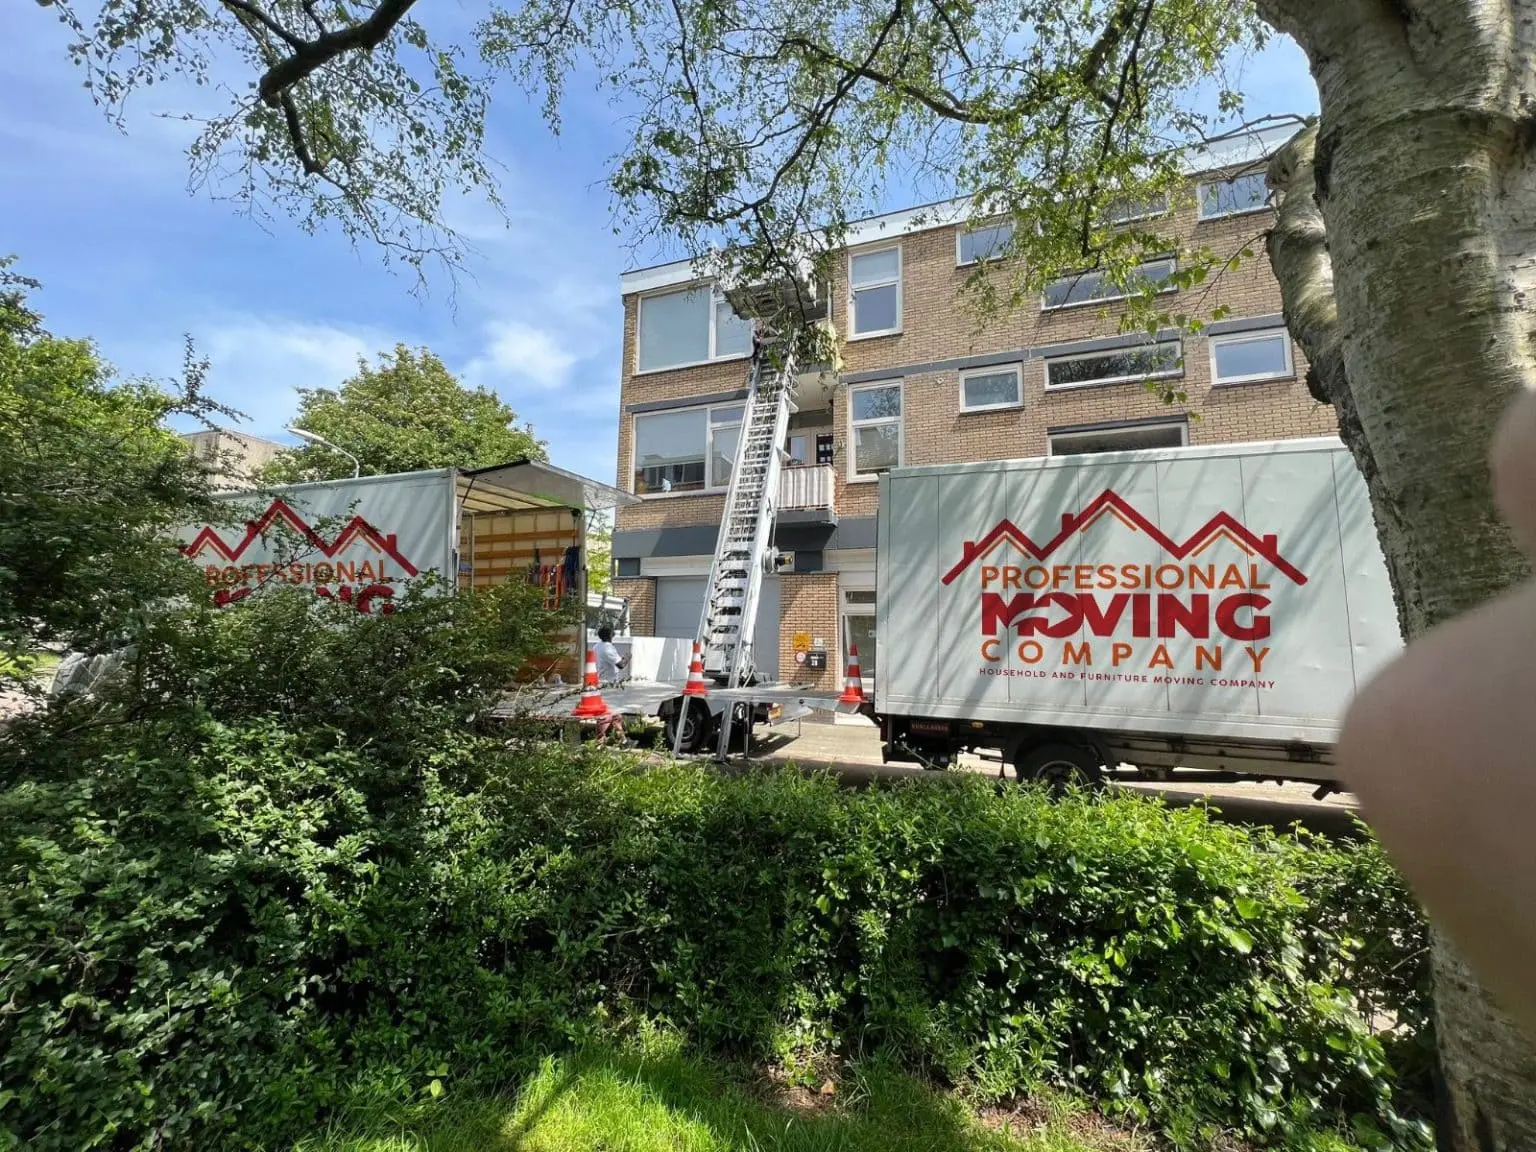 Moving Company Zuidplas | Discover Our Coverage: Cities We Serve in the Netherlands